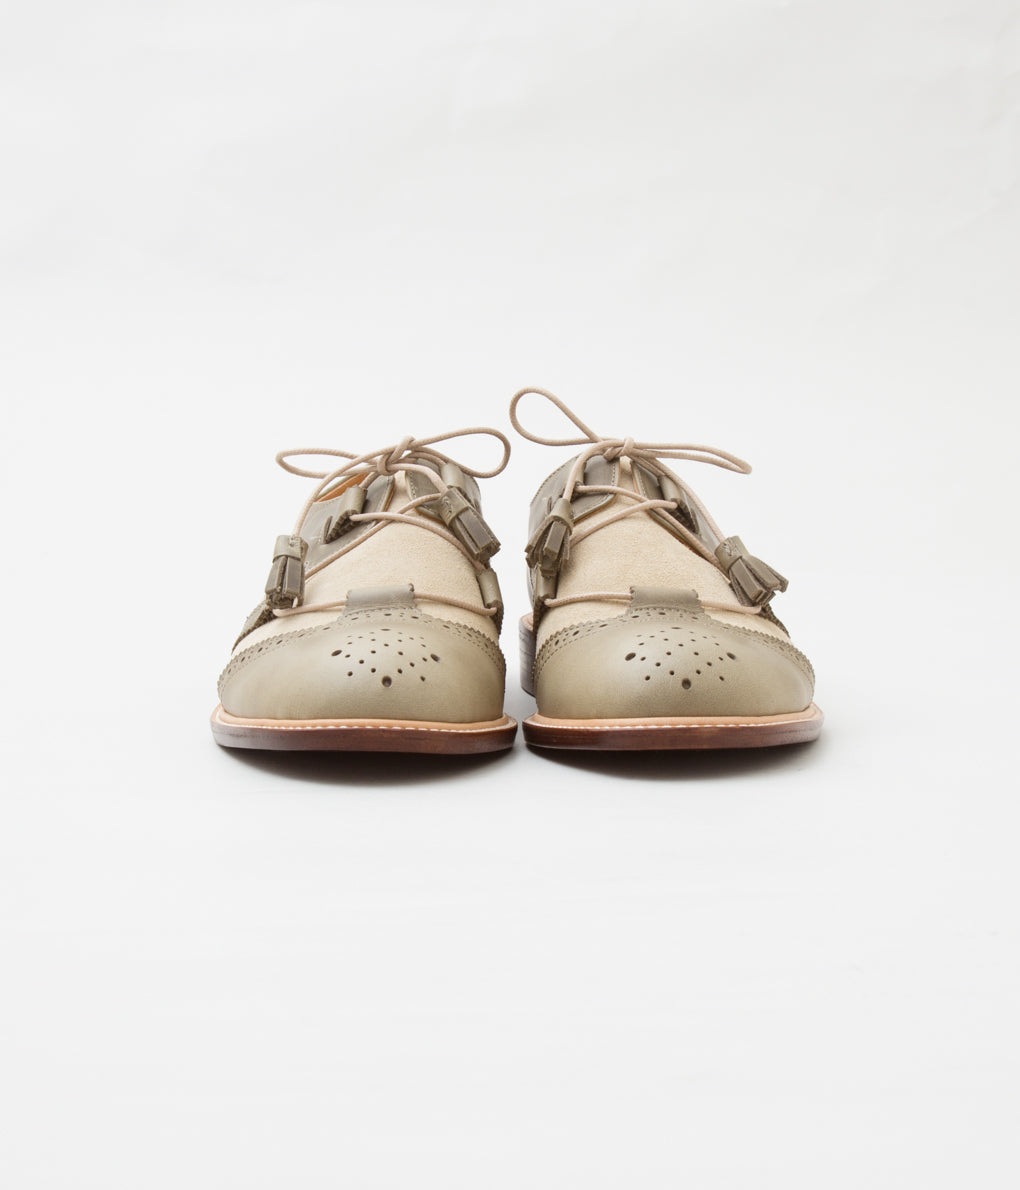 THE OLD CURIOSITY SHOP "#13843 CLASSIC GILLIE SHOES" (OLIVE)